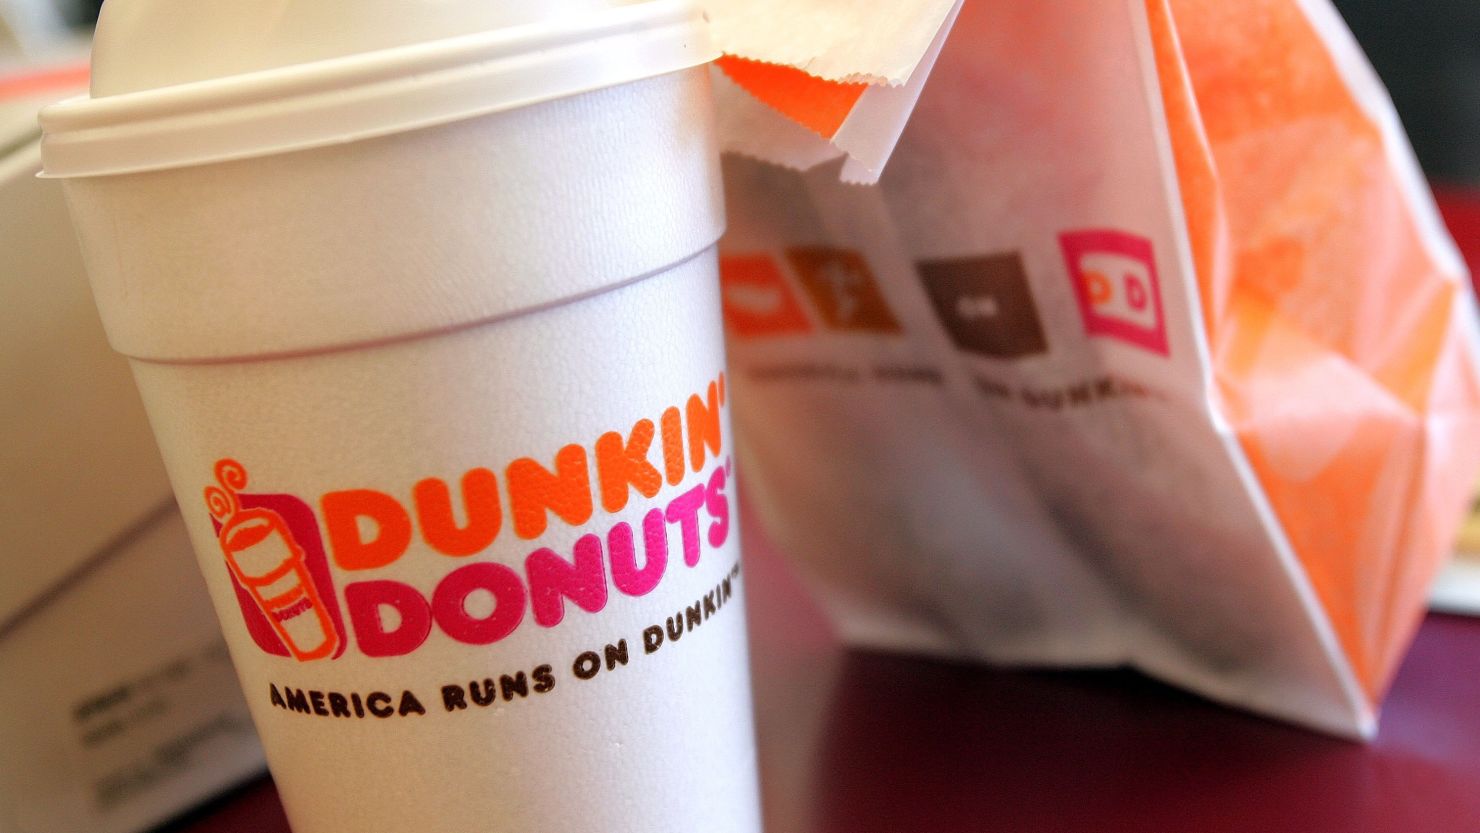 Dunkin' Donuts says it will work with store owners and employees after complaints from police officers.